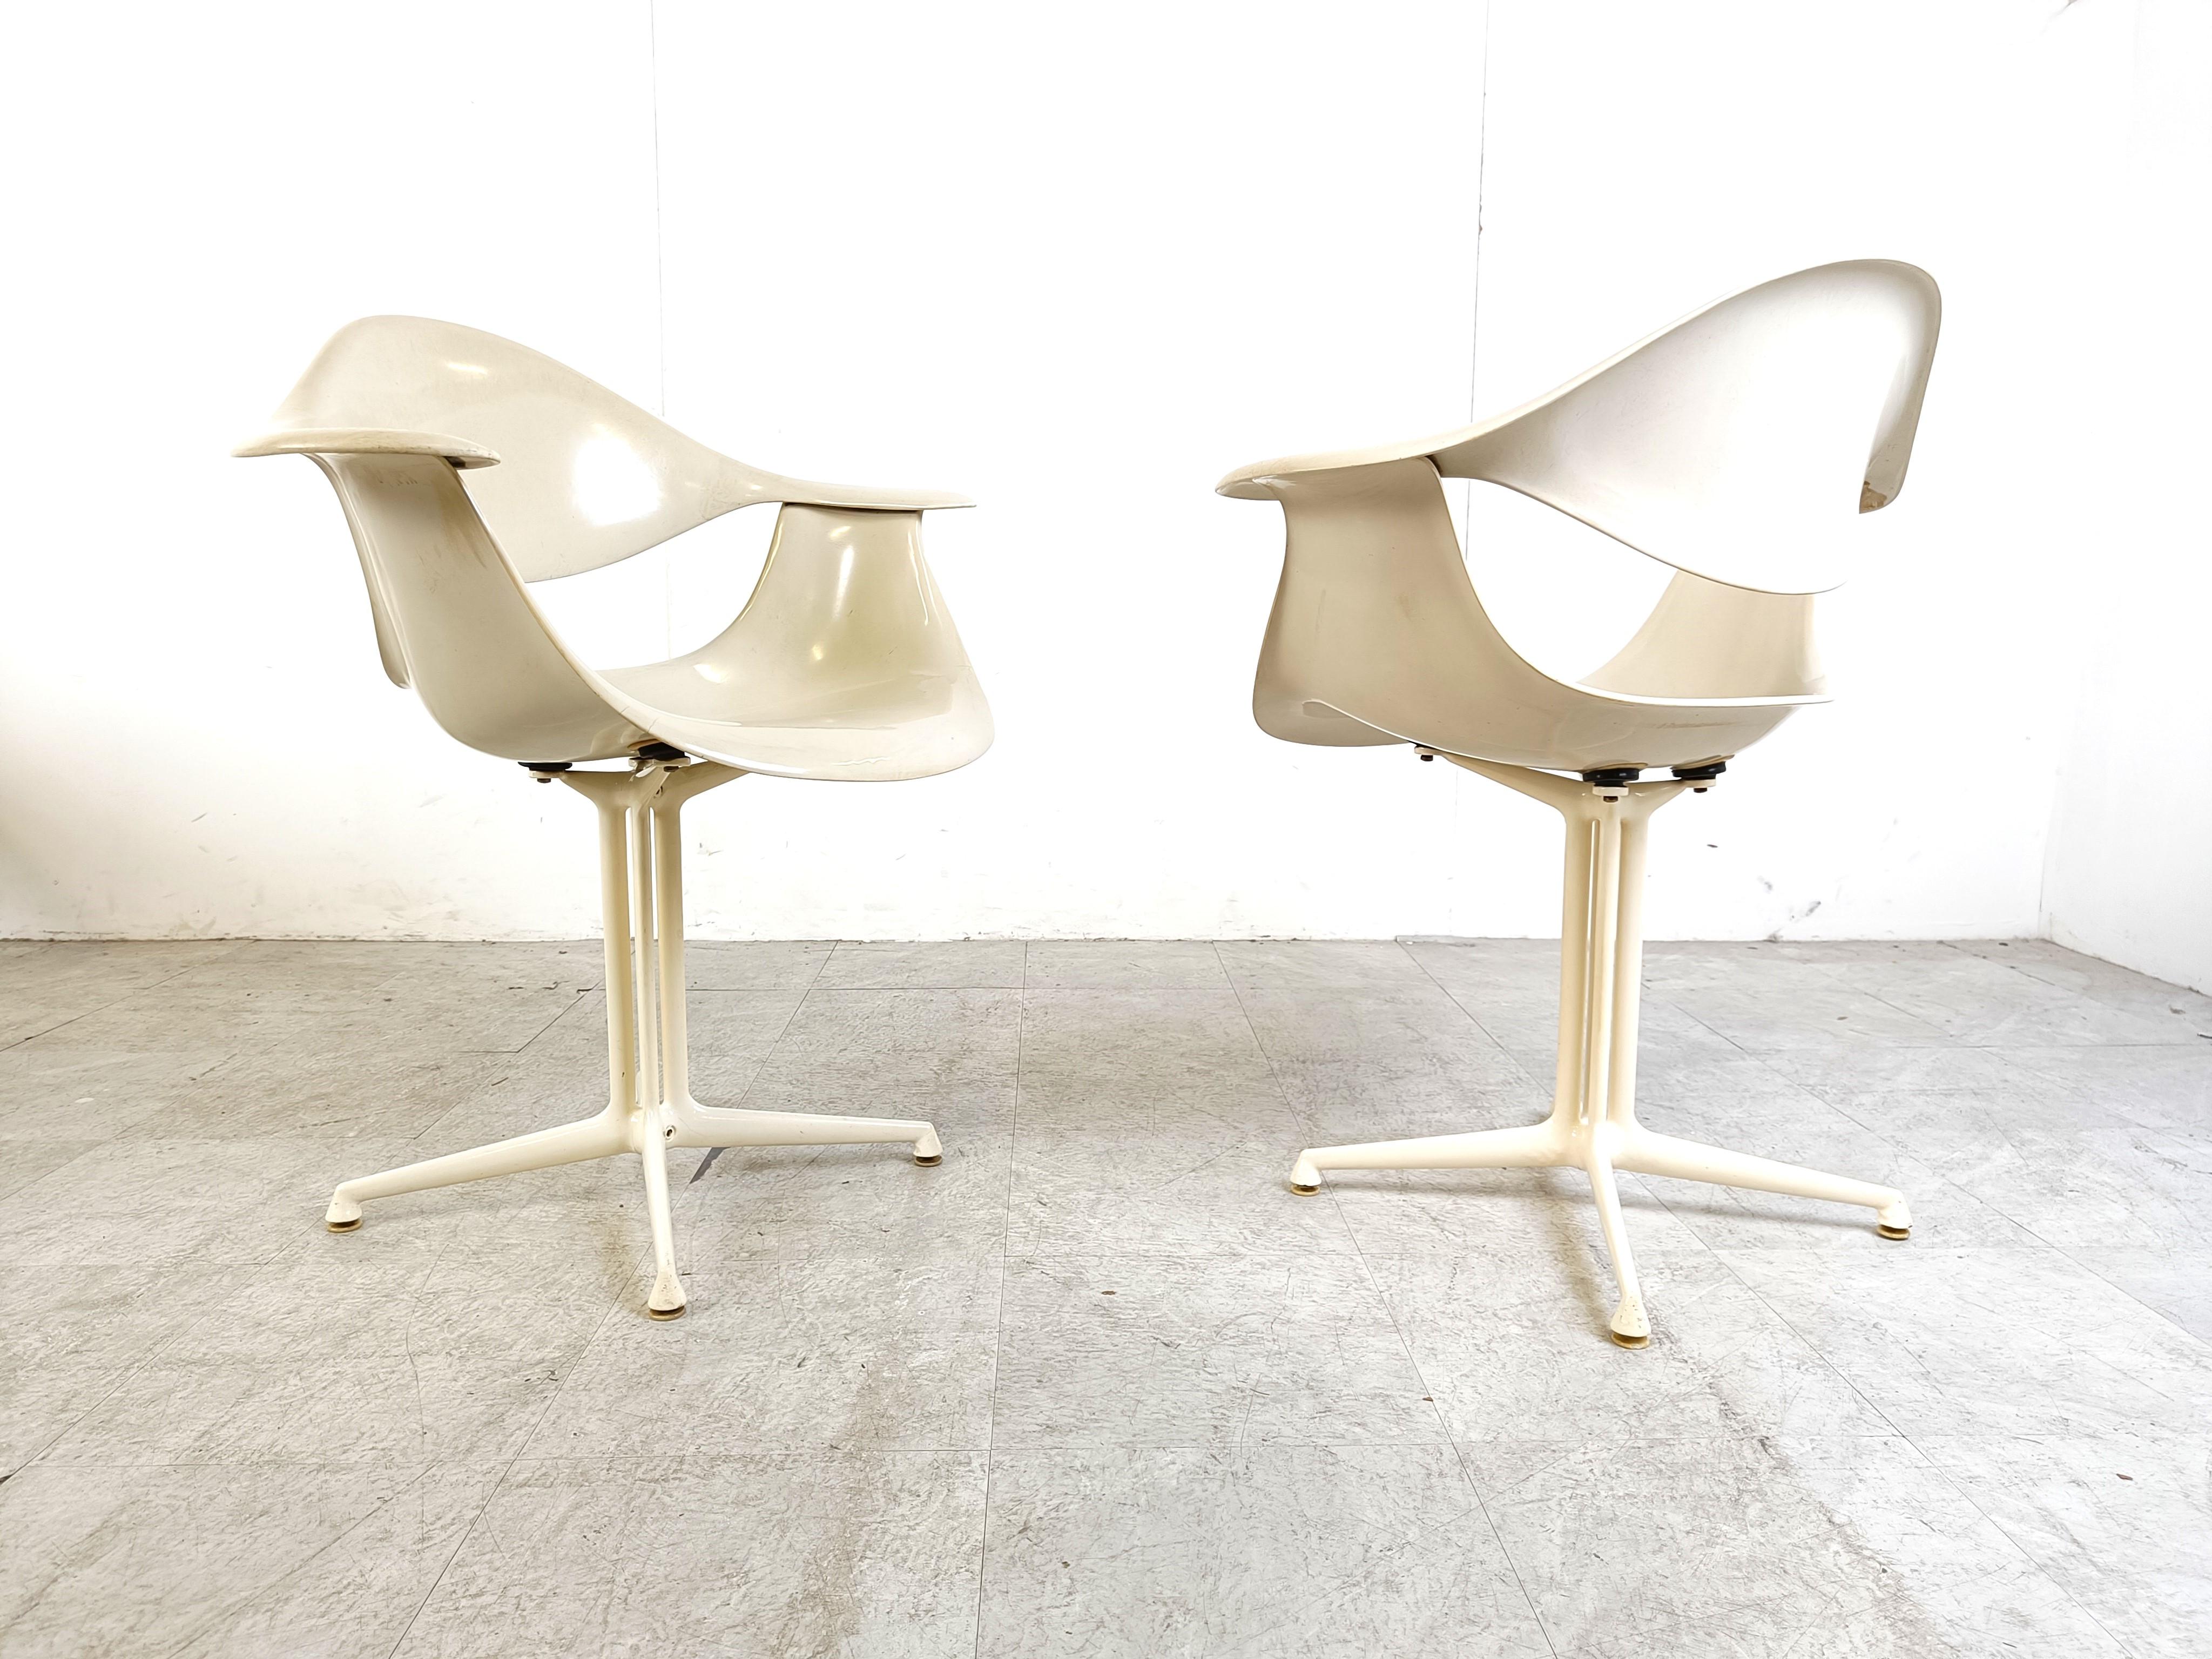 Set of 4 very rare DAF armchairs designed by George nelson for Herman Miller.

The chairs are made from fiberglas shells mounted on white lacquered metal legs.

Very similar to the La fonda chairs by Eames.

These early examples have their old